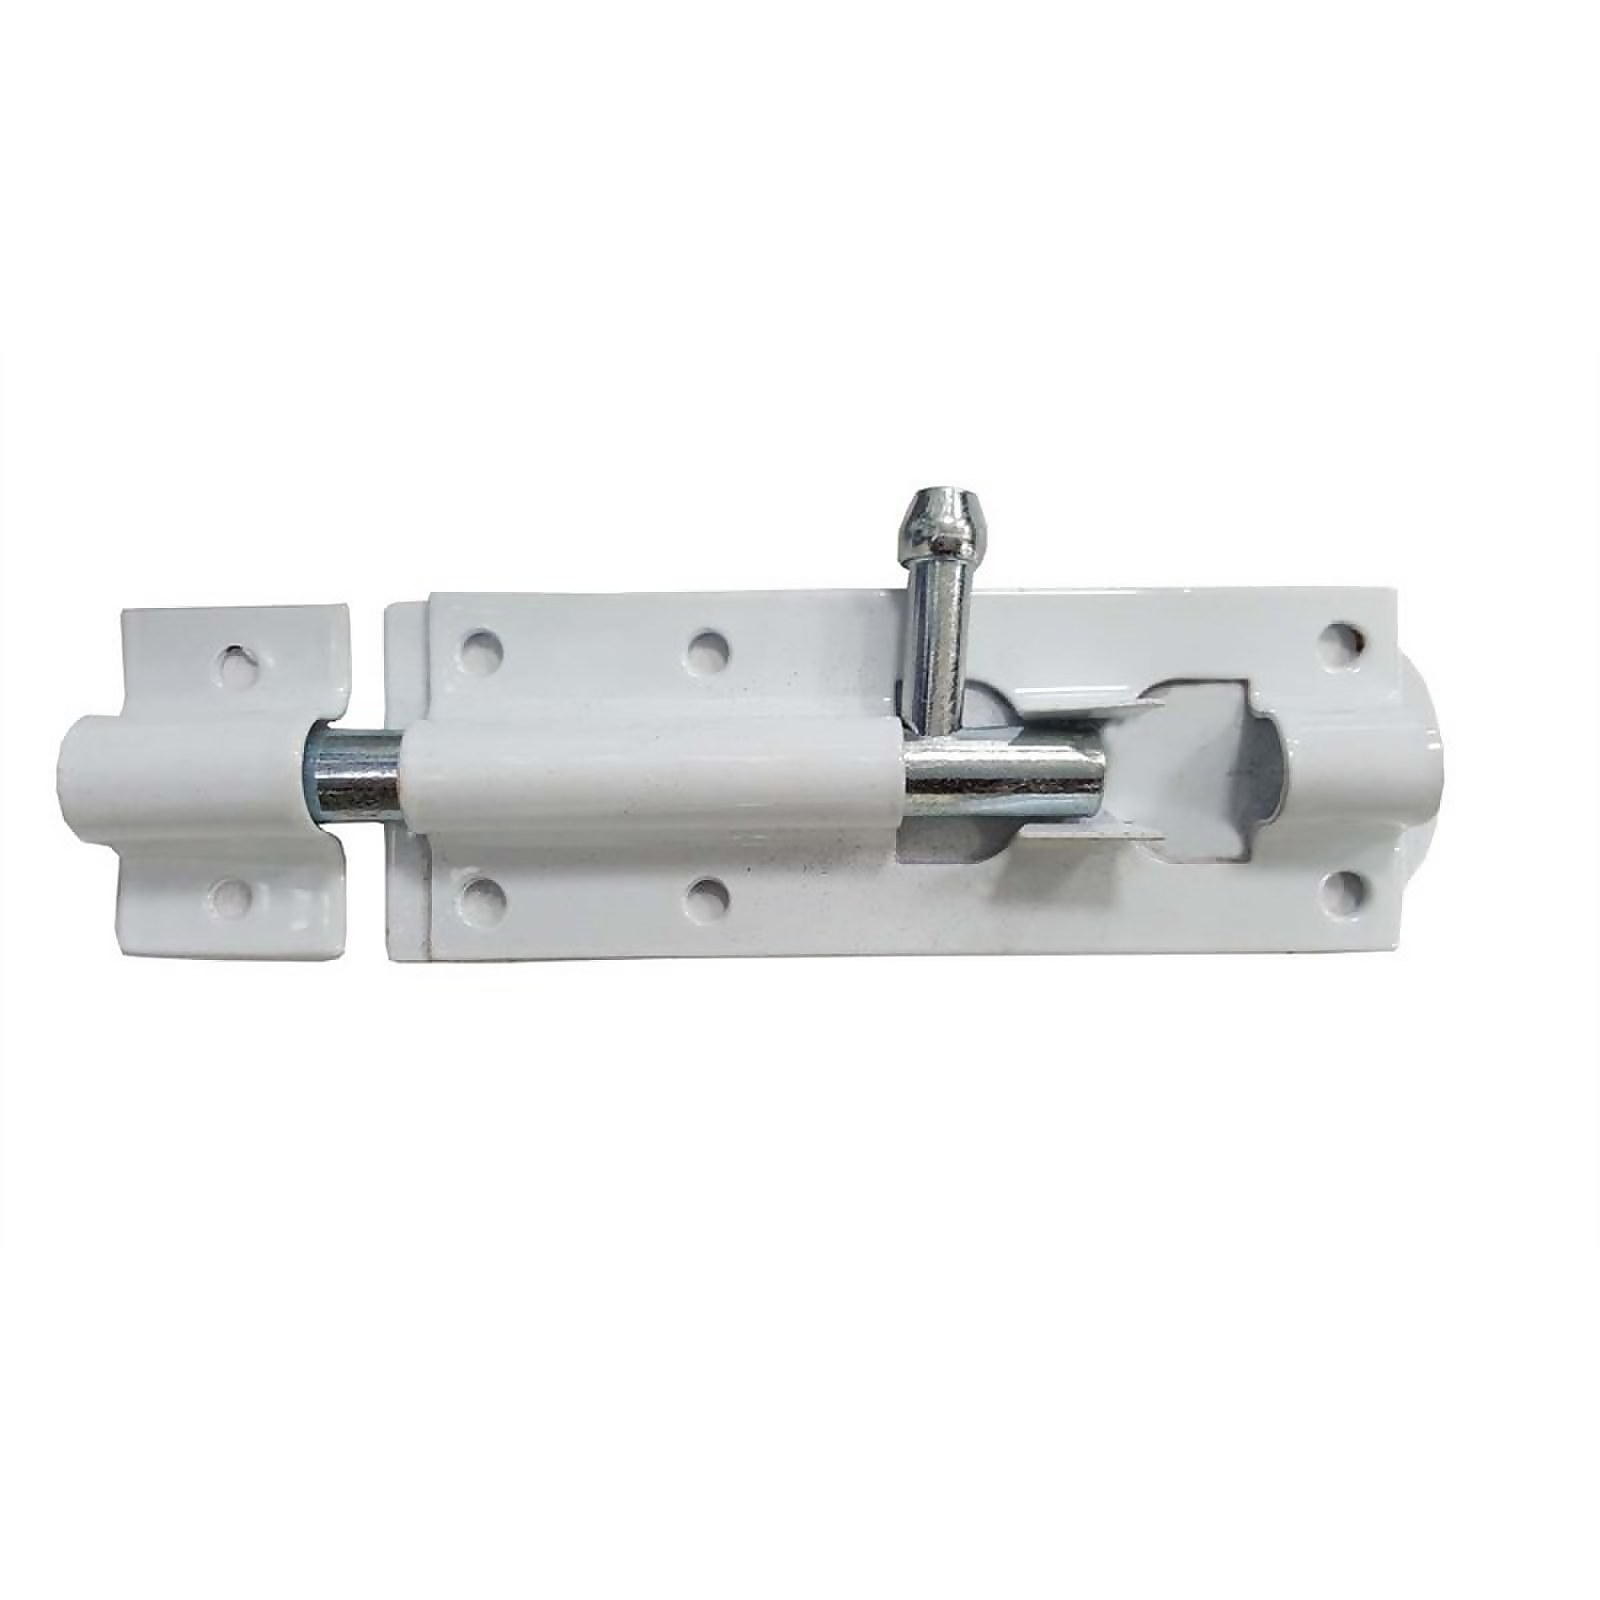 Photo of Tower Bolt - White - 100mm